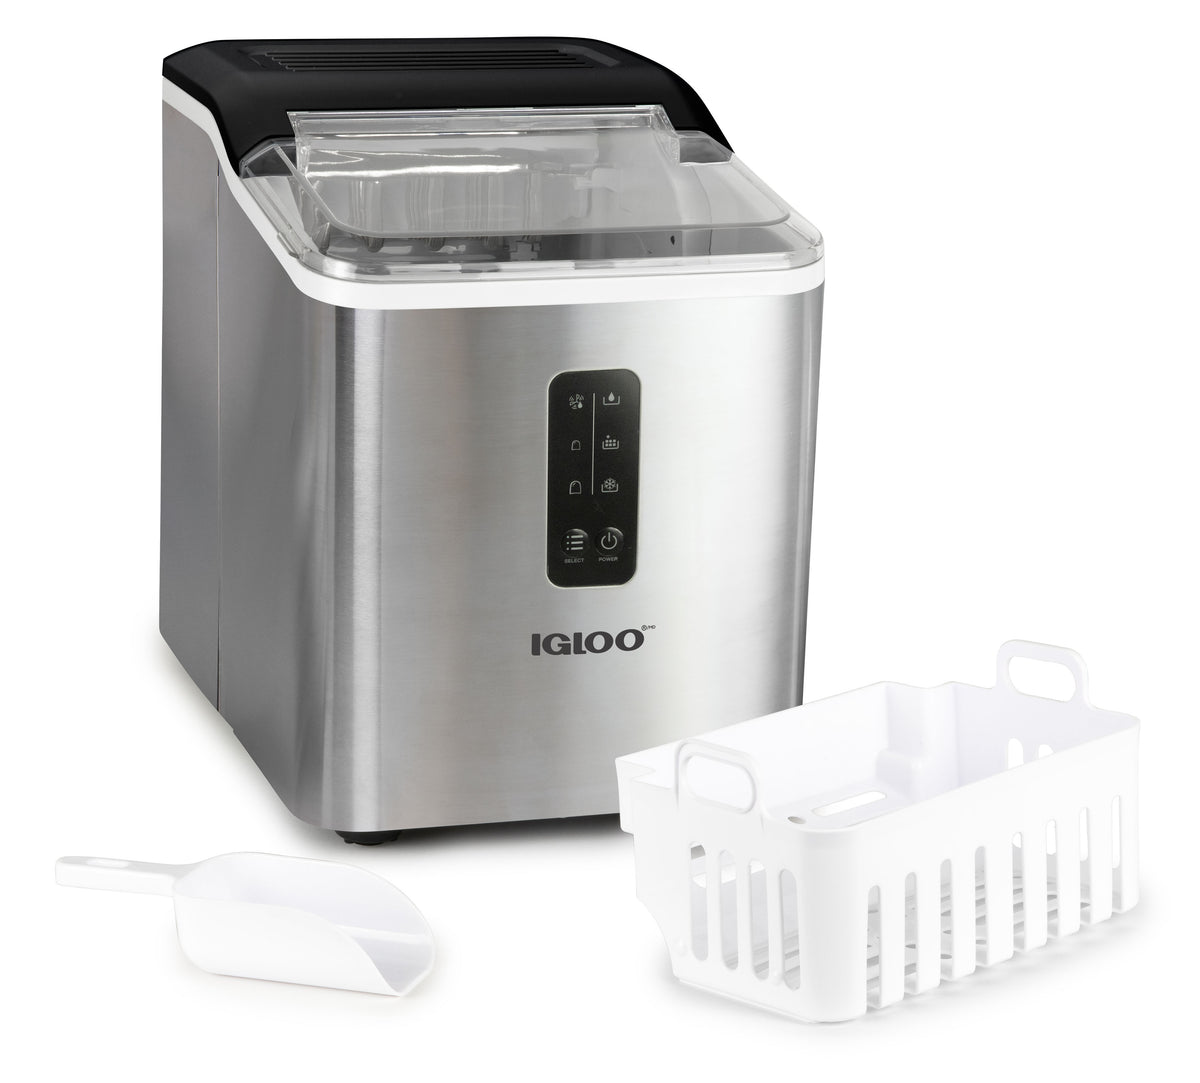 Igloo Automatic Self-Cleaning Portable Countertop Ice Maker